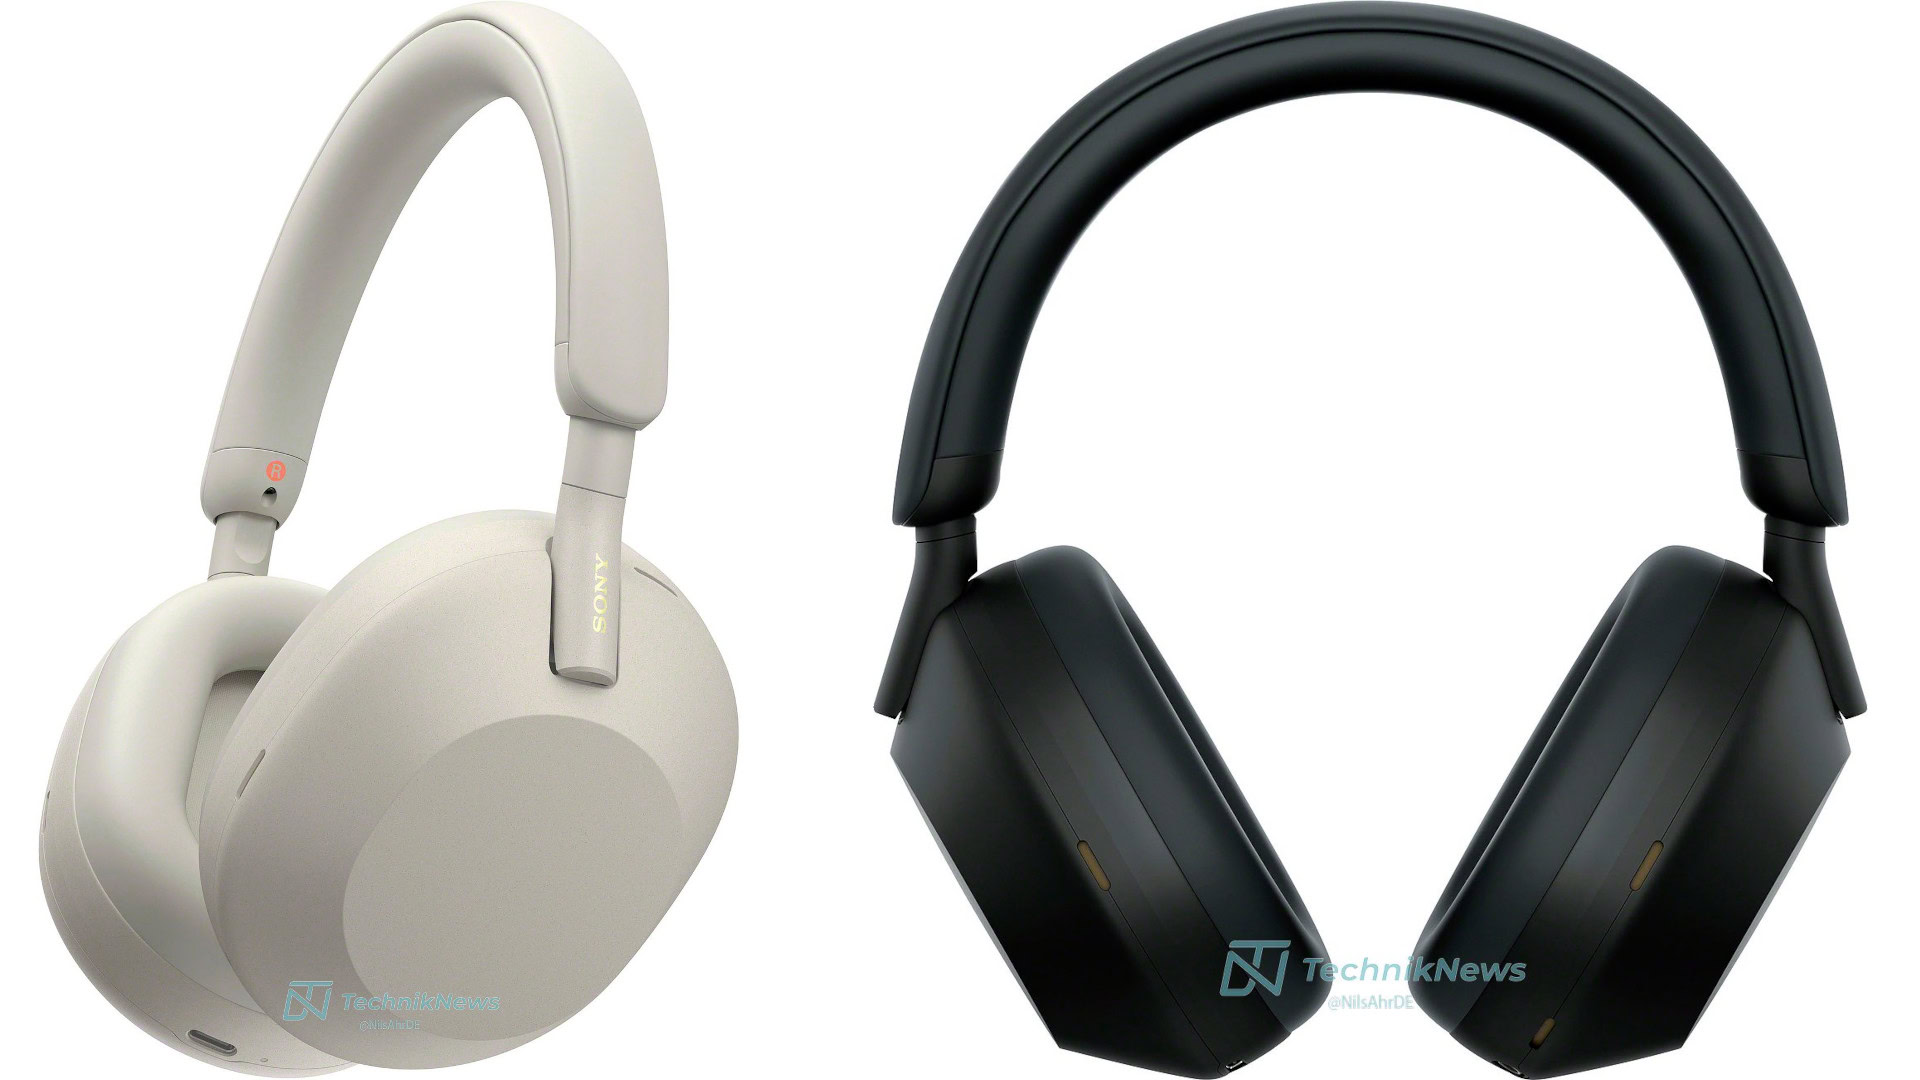 Sony WH-1000XM5 headphones are coming next week - Android Authority